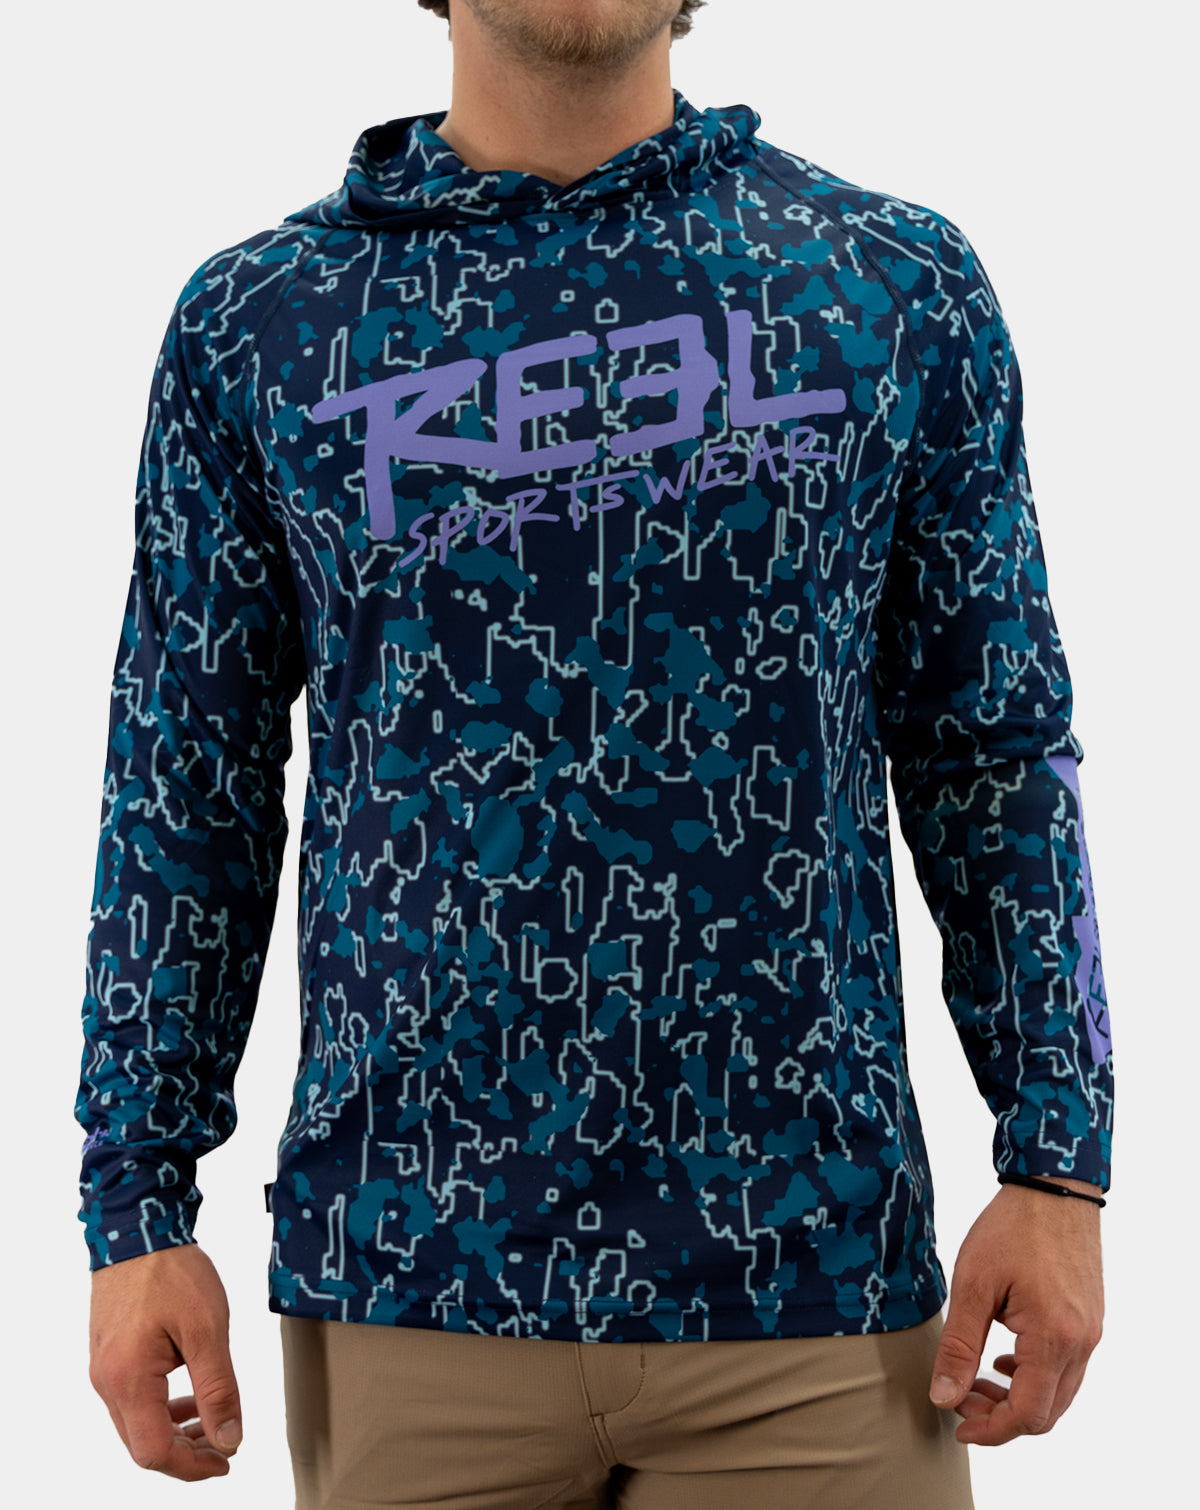 Reef & Reel Fishing Apparel Summer Outdoor Long Sleeve T-shirt With Hood  Sun Protection Breathable Angling Clothing Homme Peche